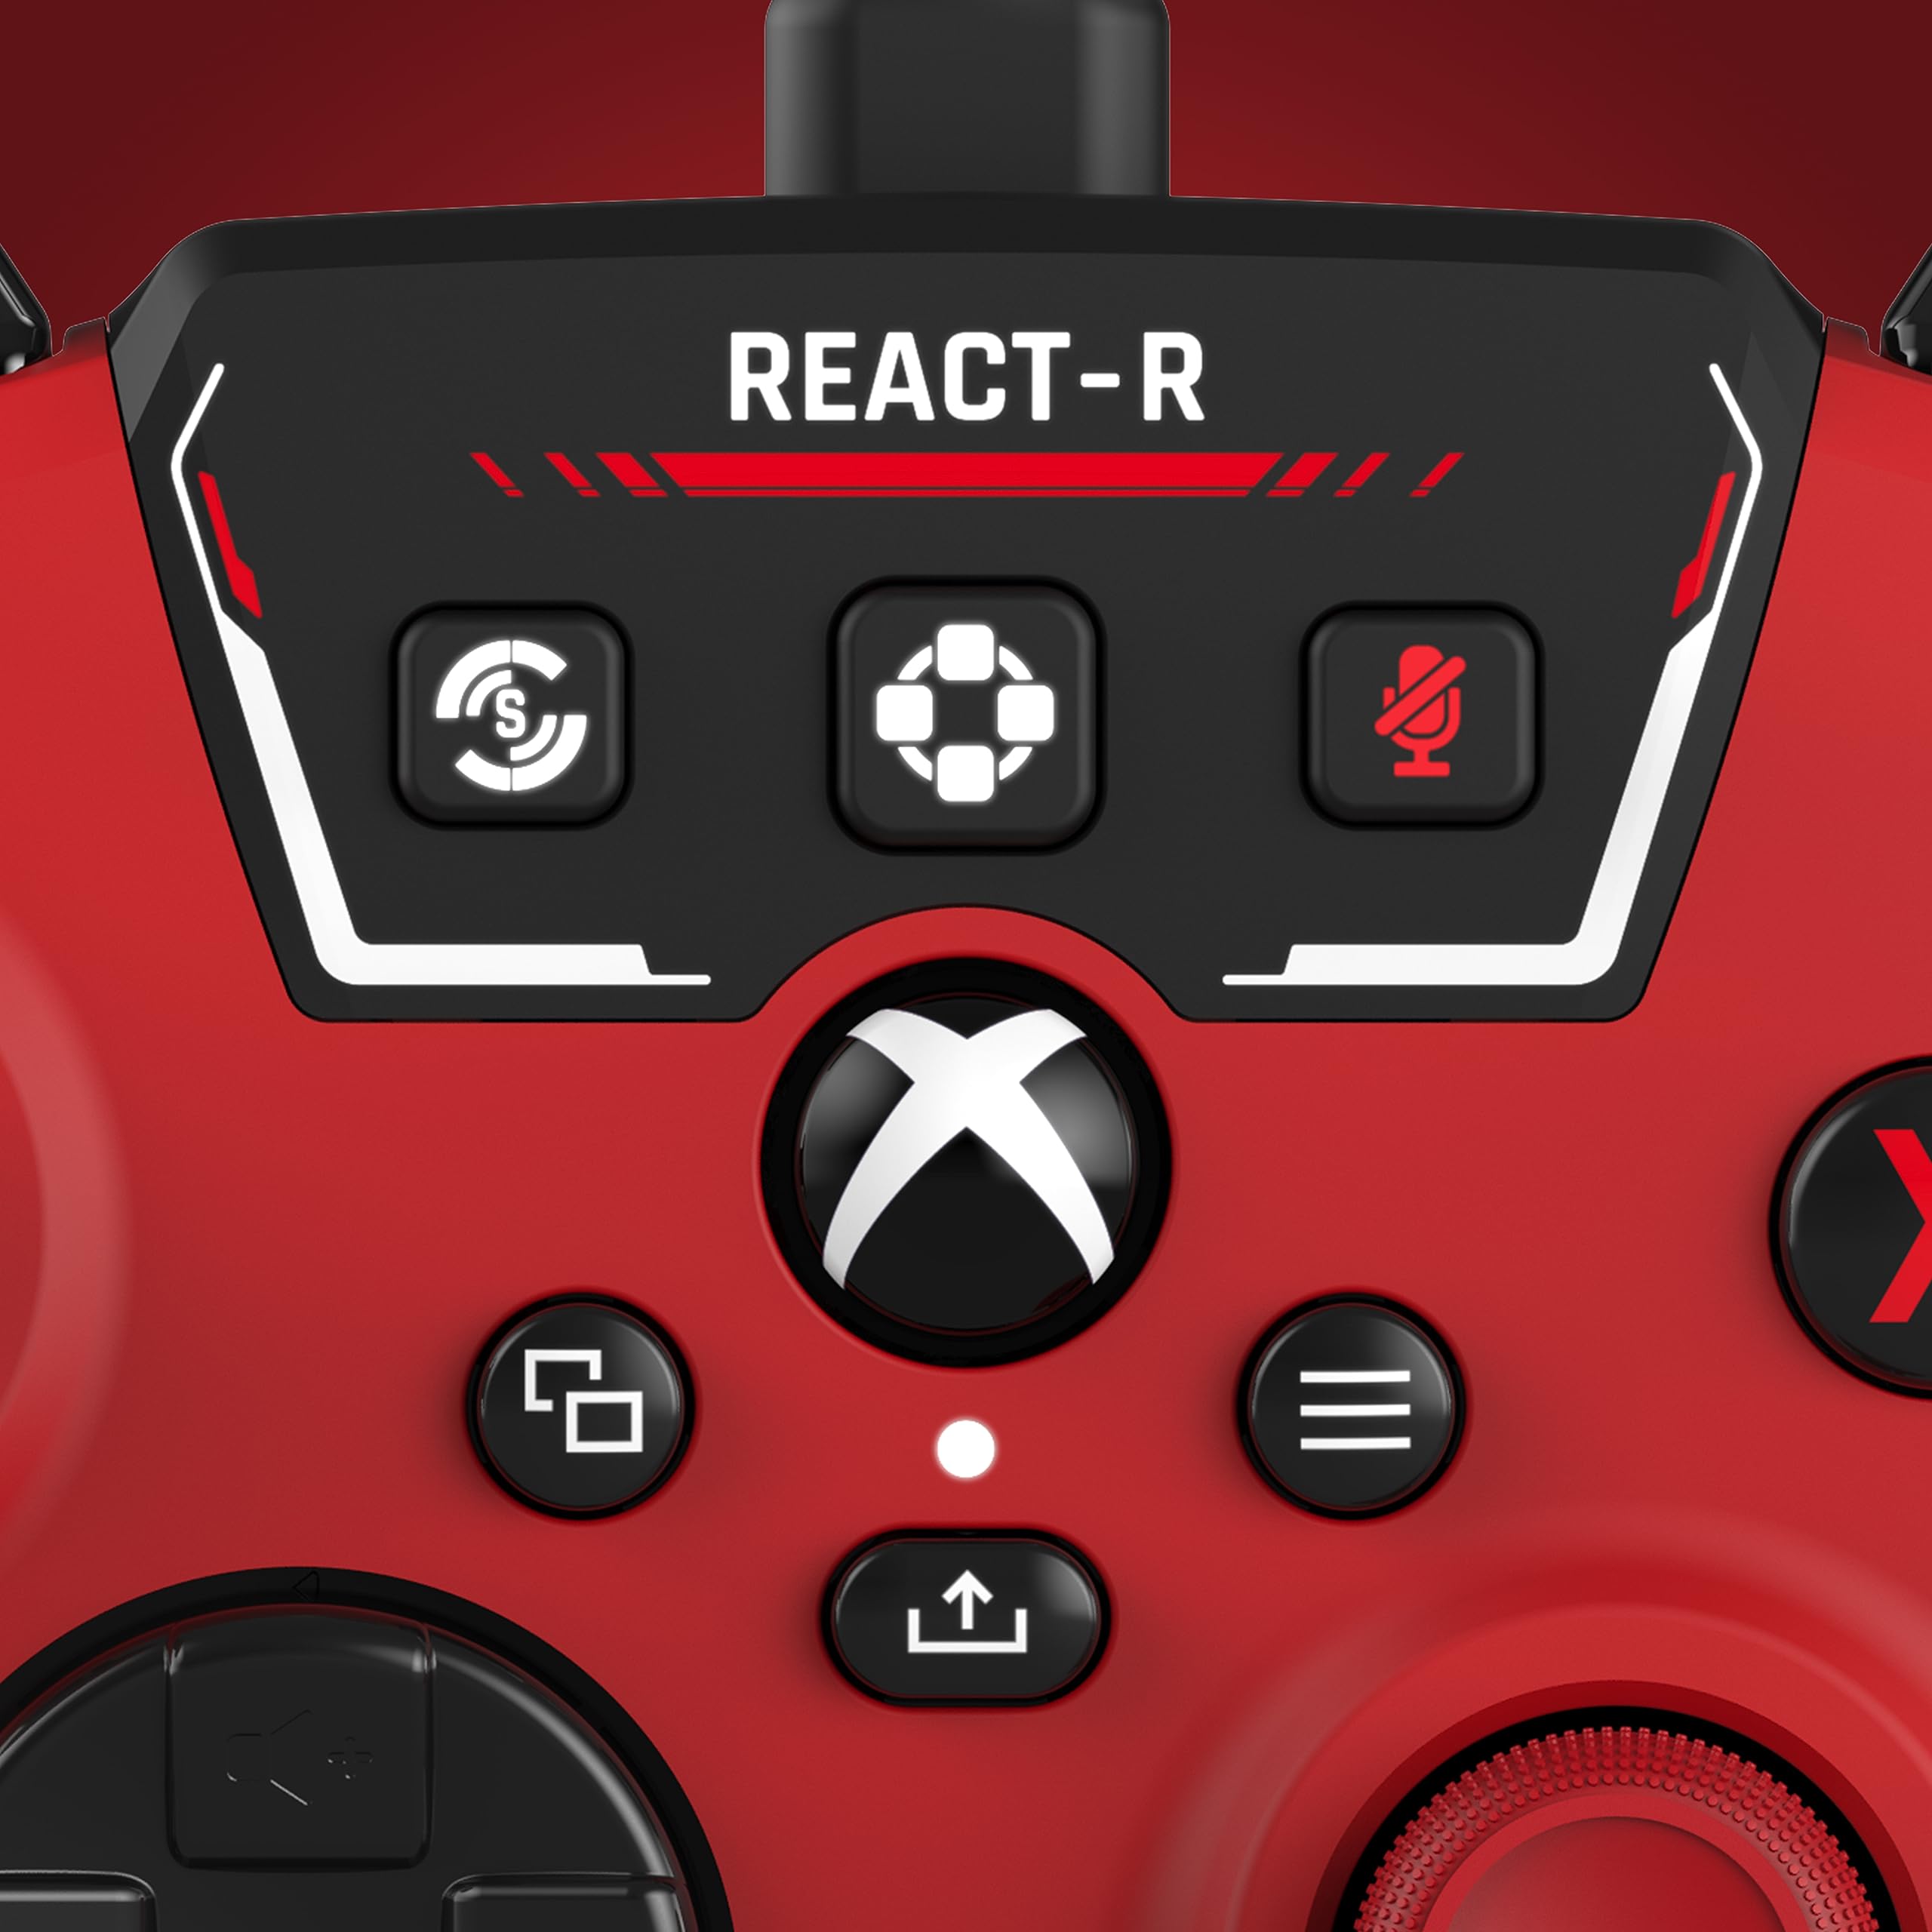 Turtle Beach REACT-R Wired Game Controller – Licensed for Xbox Series X|S, Xbox One, and Windows 10|11 PC’s – Red